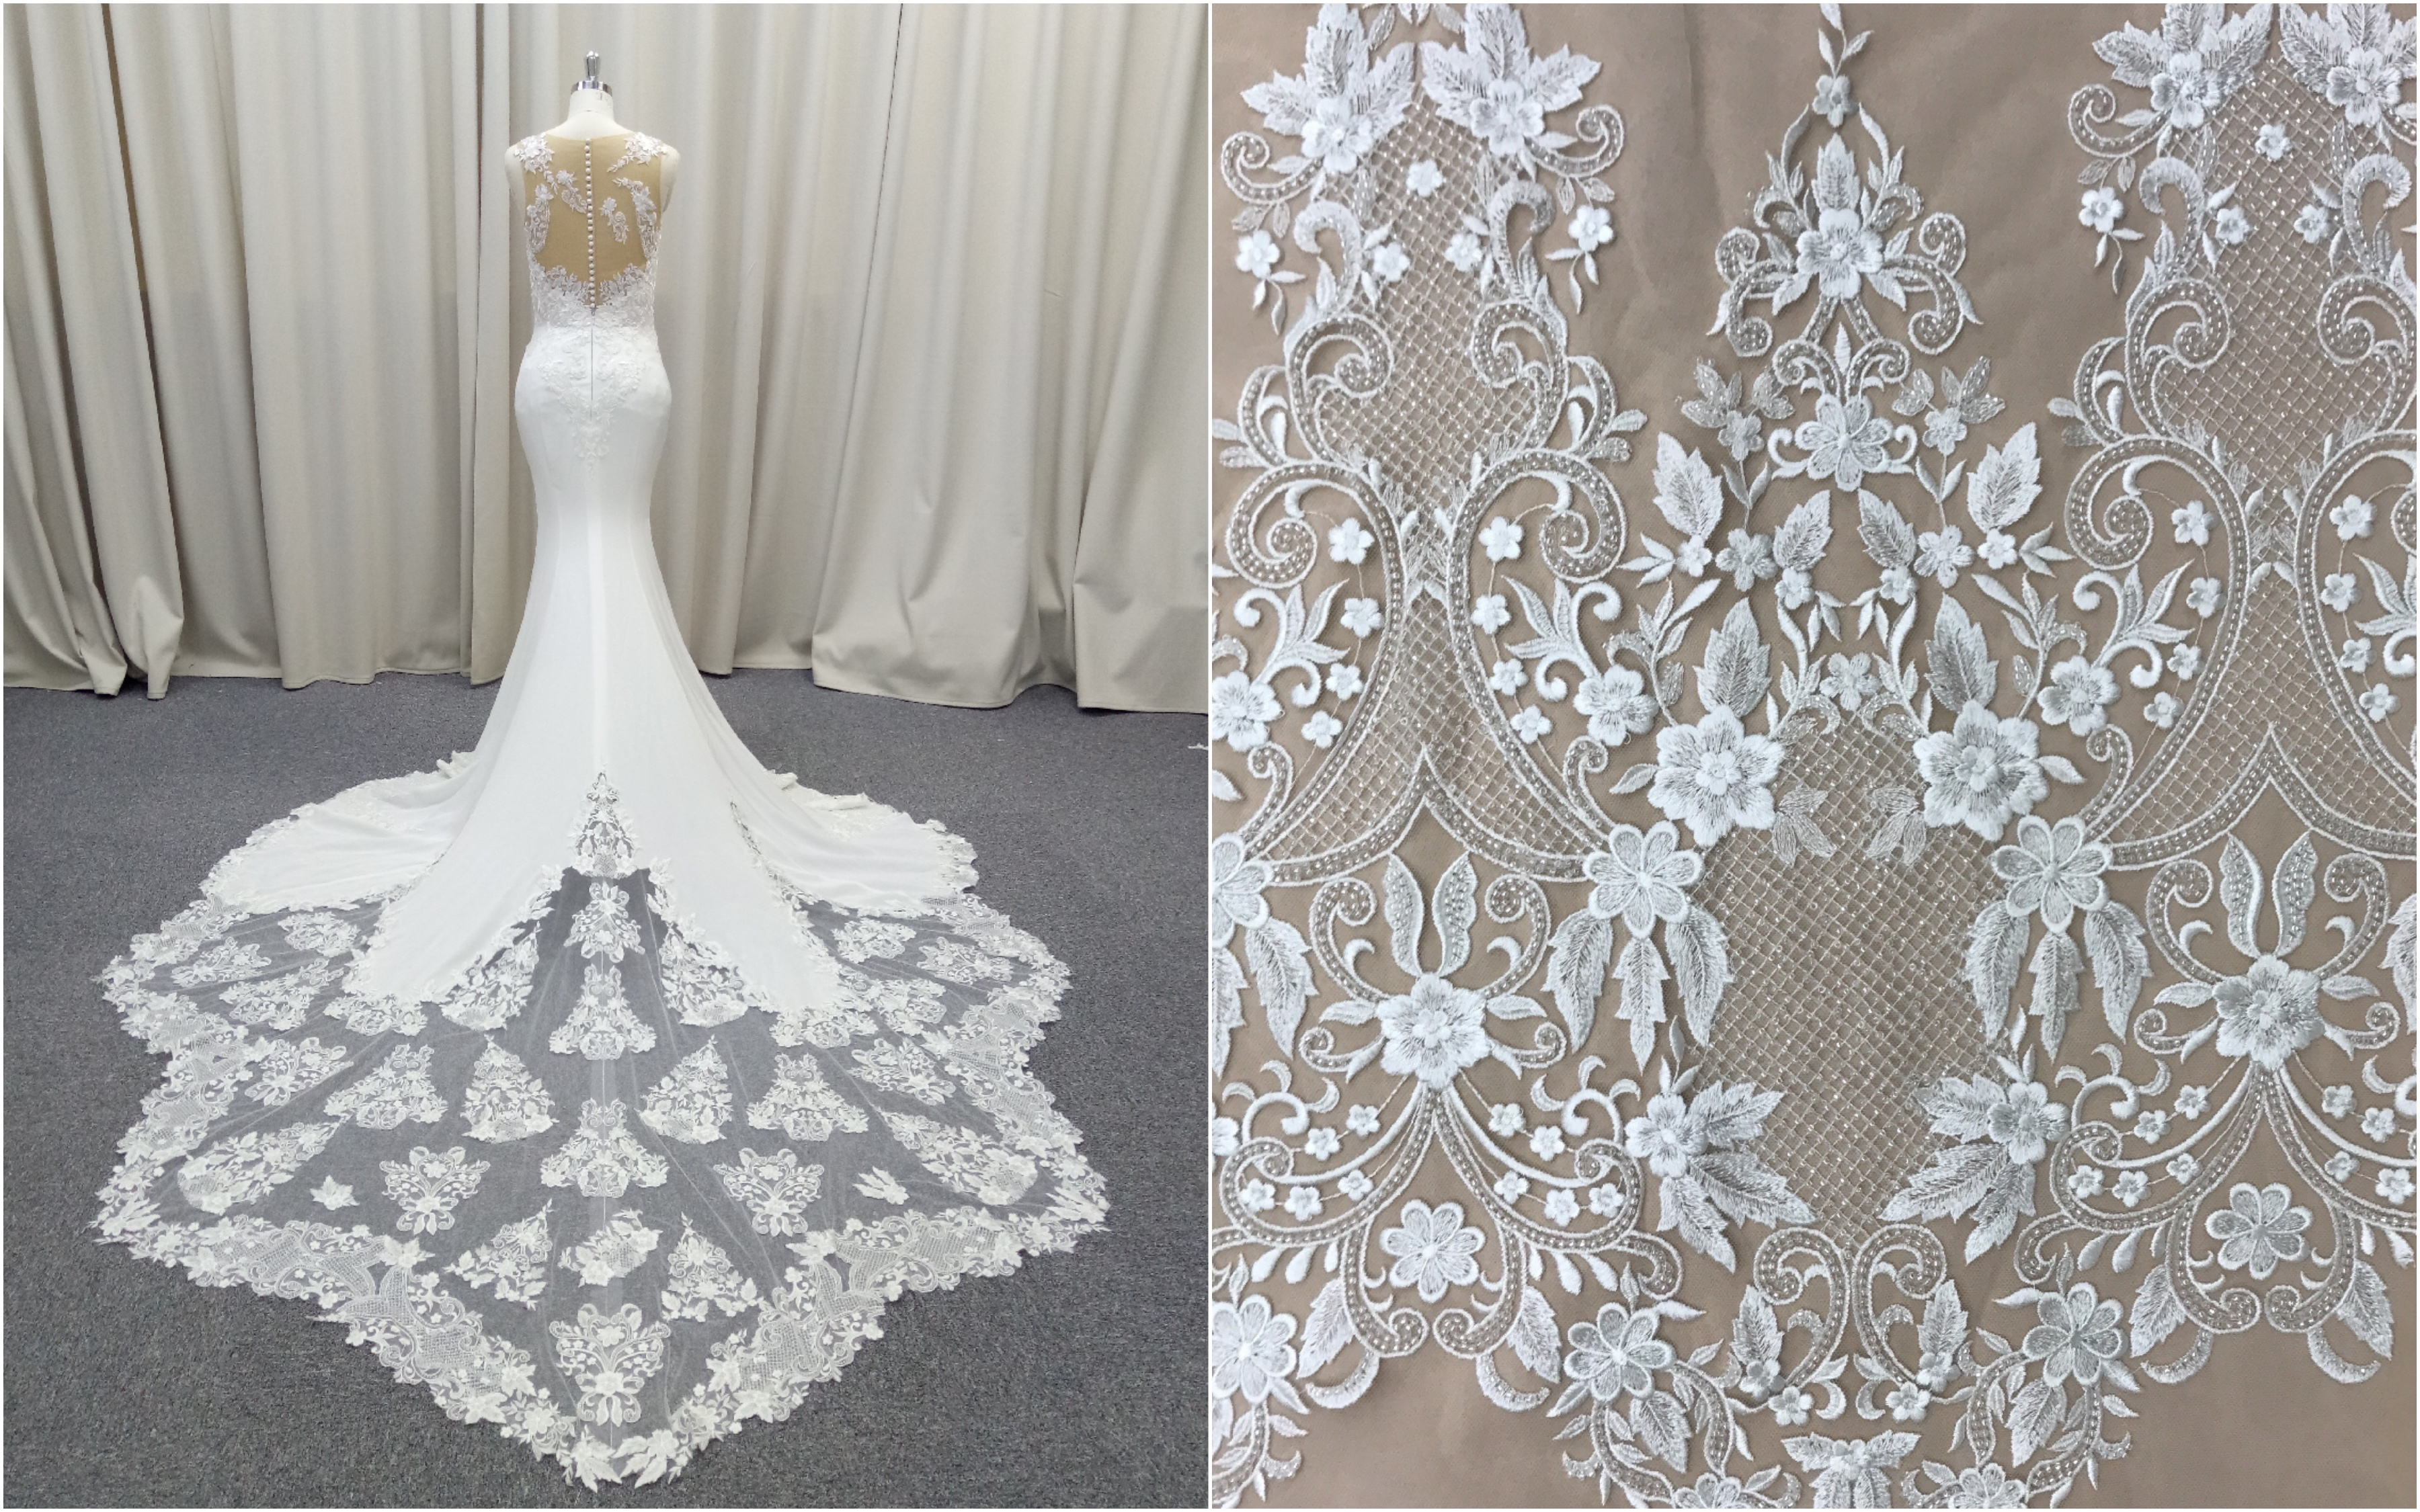 Wedding Dress Embroidery Patterns These Wedding Dresses With Lace Cutout Trains Deserve A Double Take